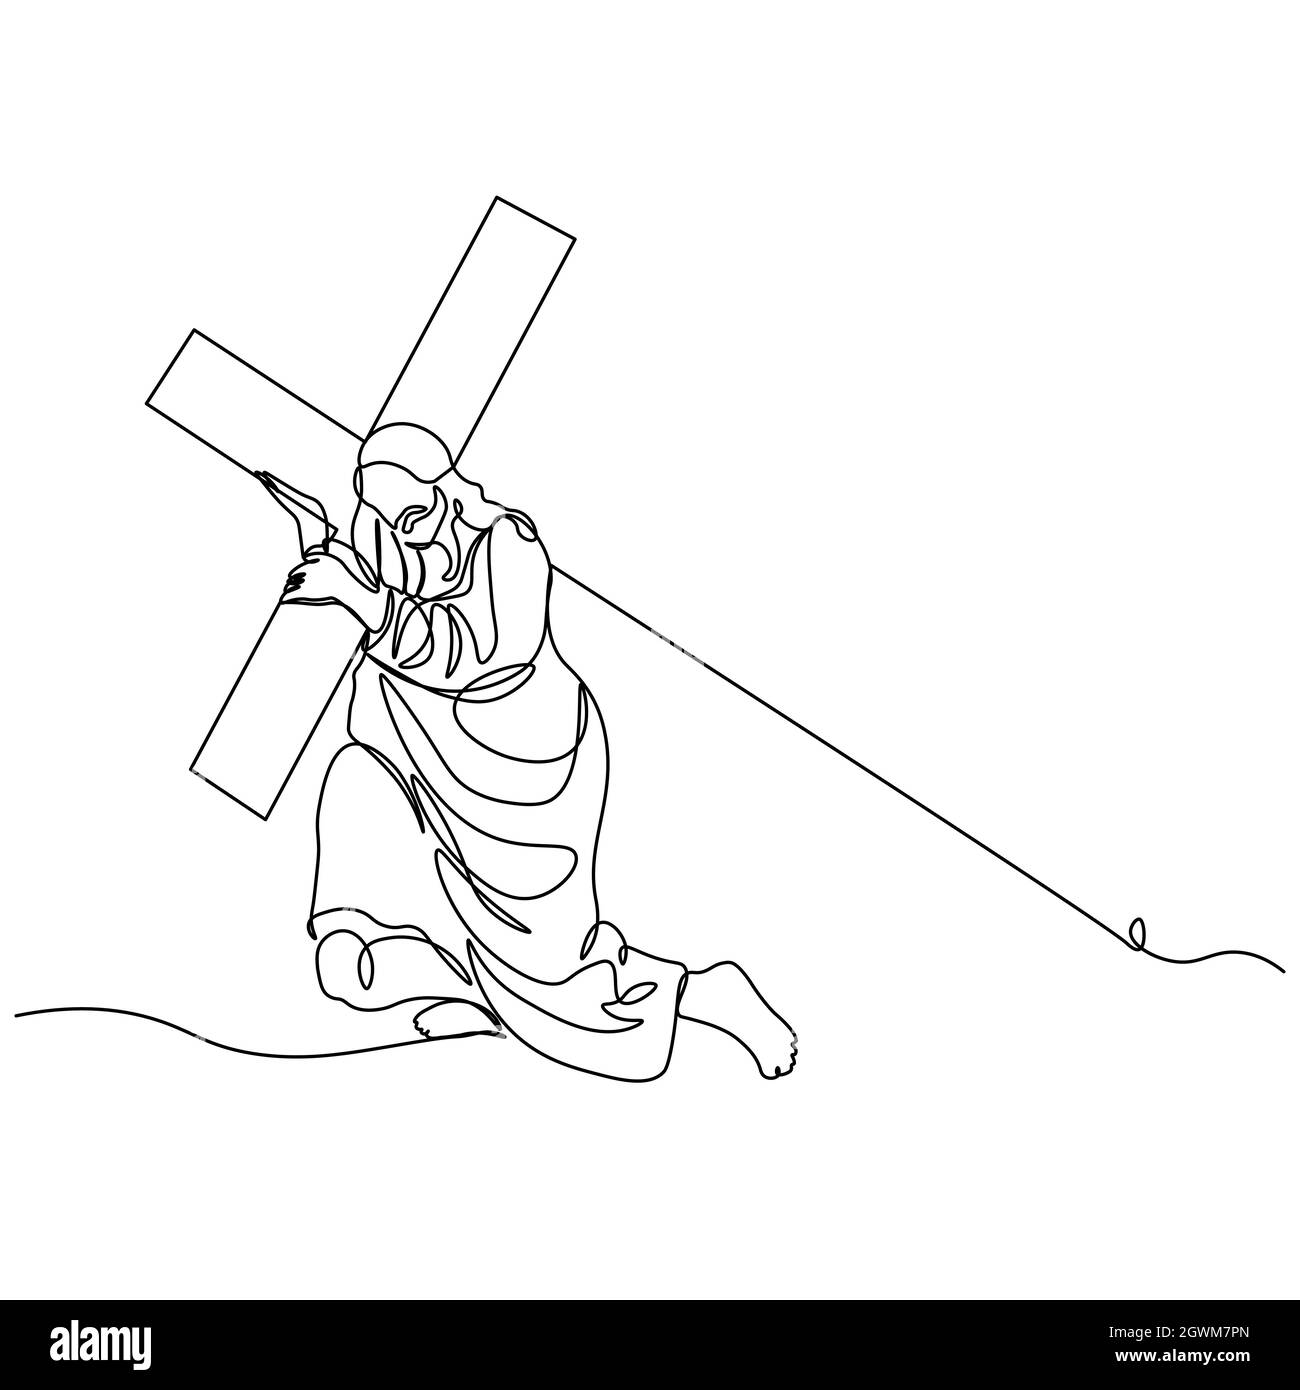 One continuous single drawn line art doodle spirituality cross, crucifixion Jesus Christ .Isolated image of a hand drawn outline on a white background Stock Vector